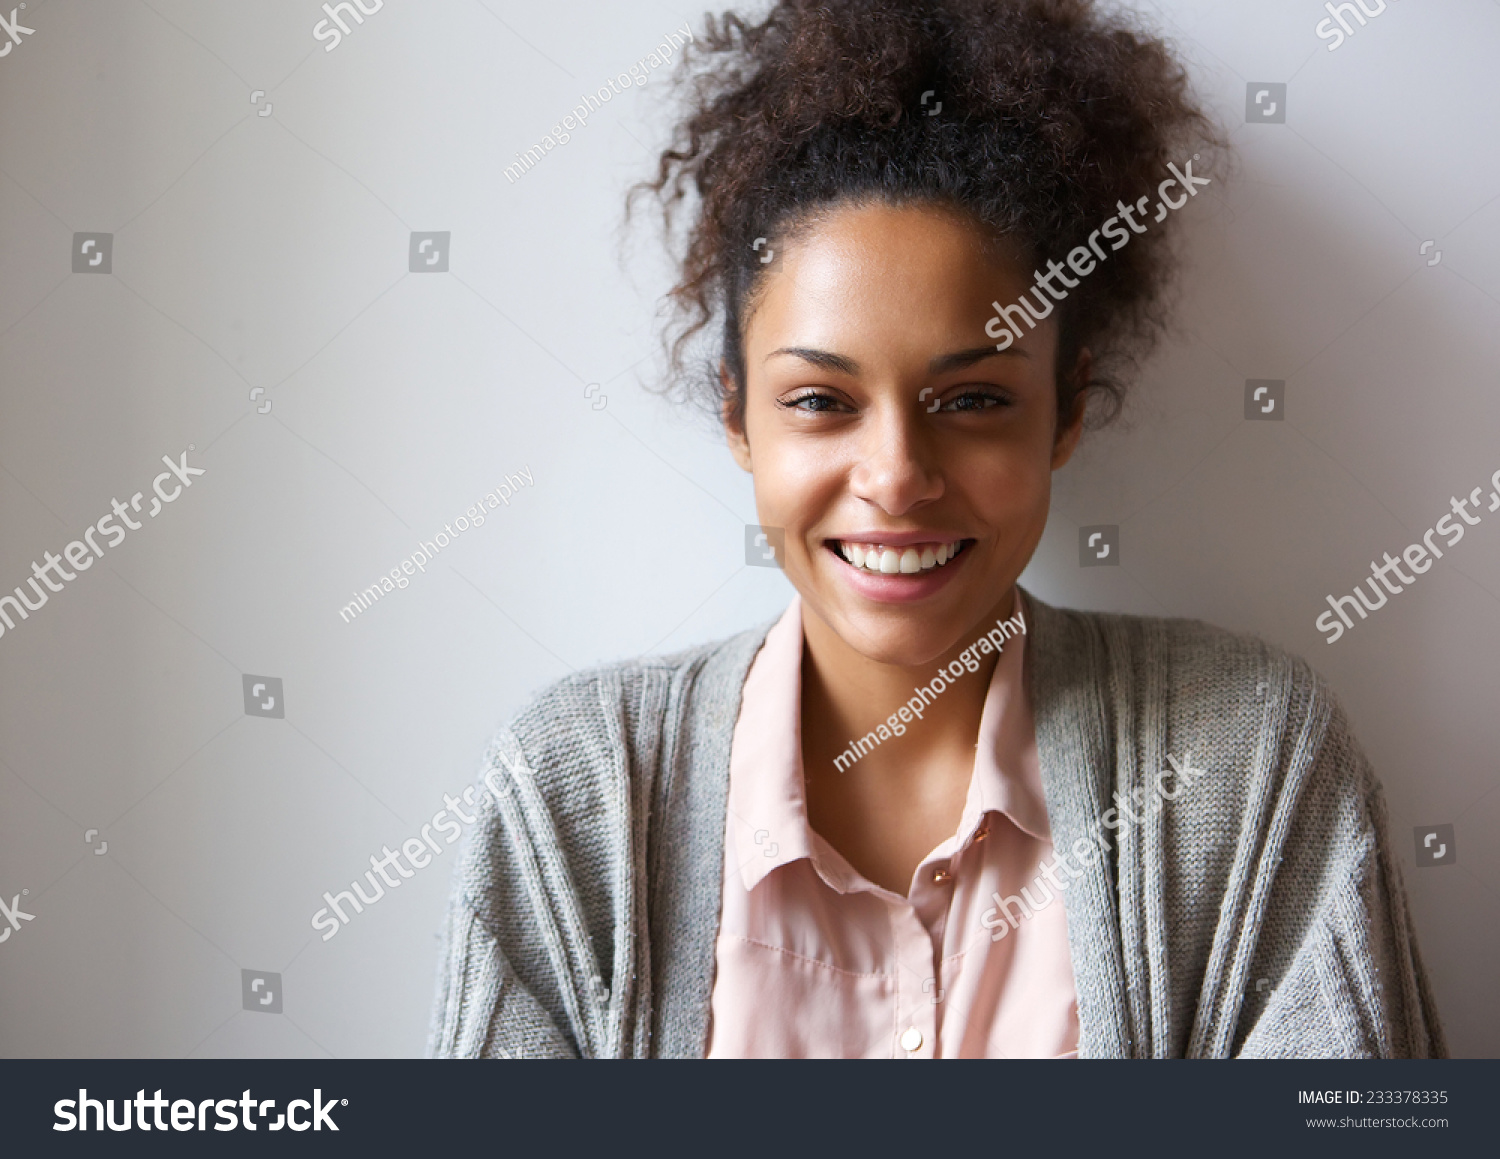 Close up portrait of a beautiful young african american woman smiling #233378335